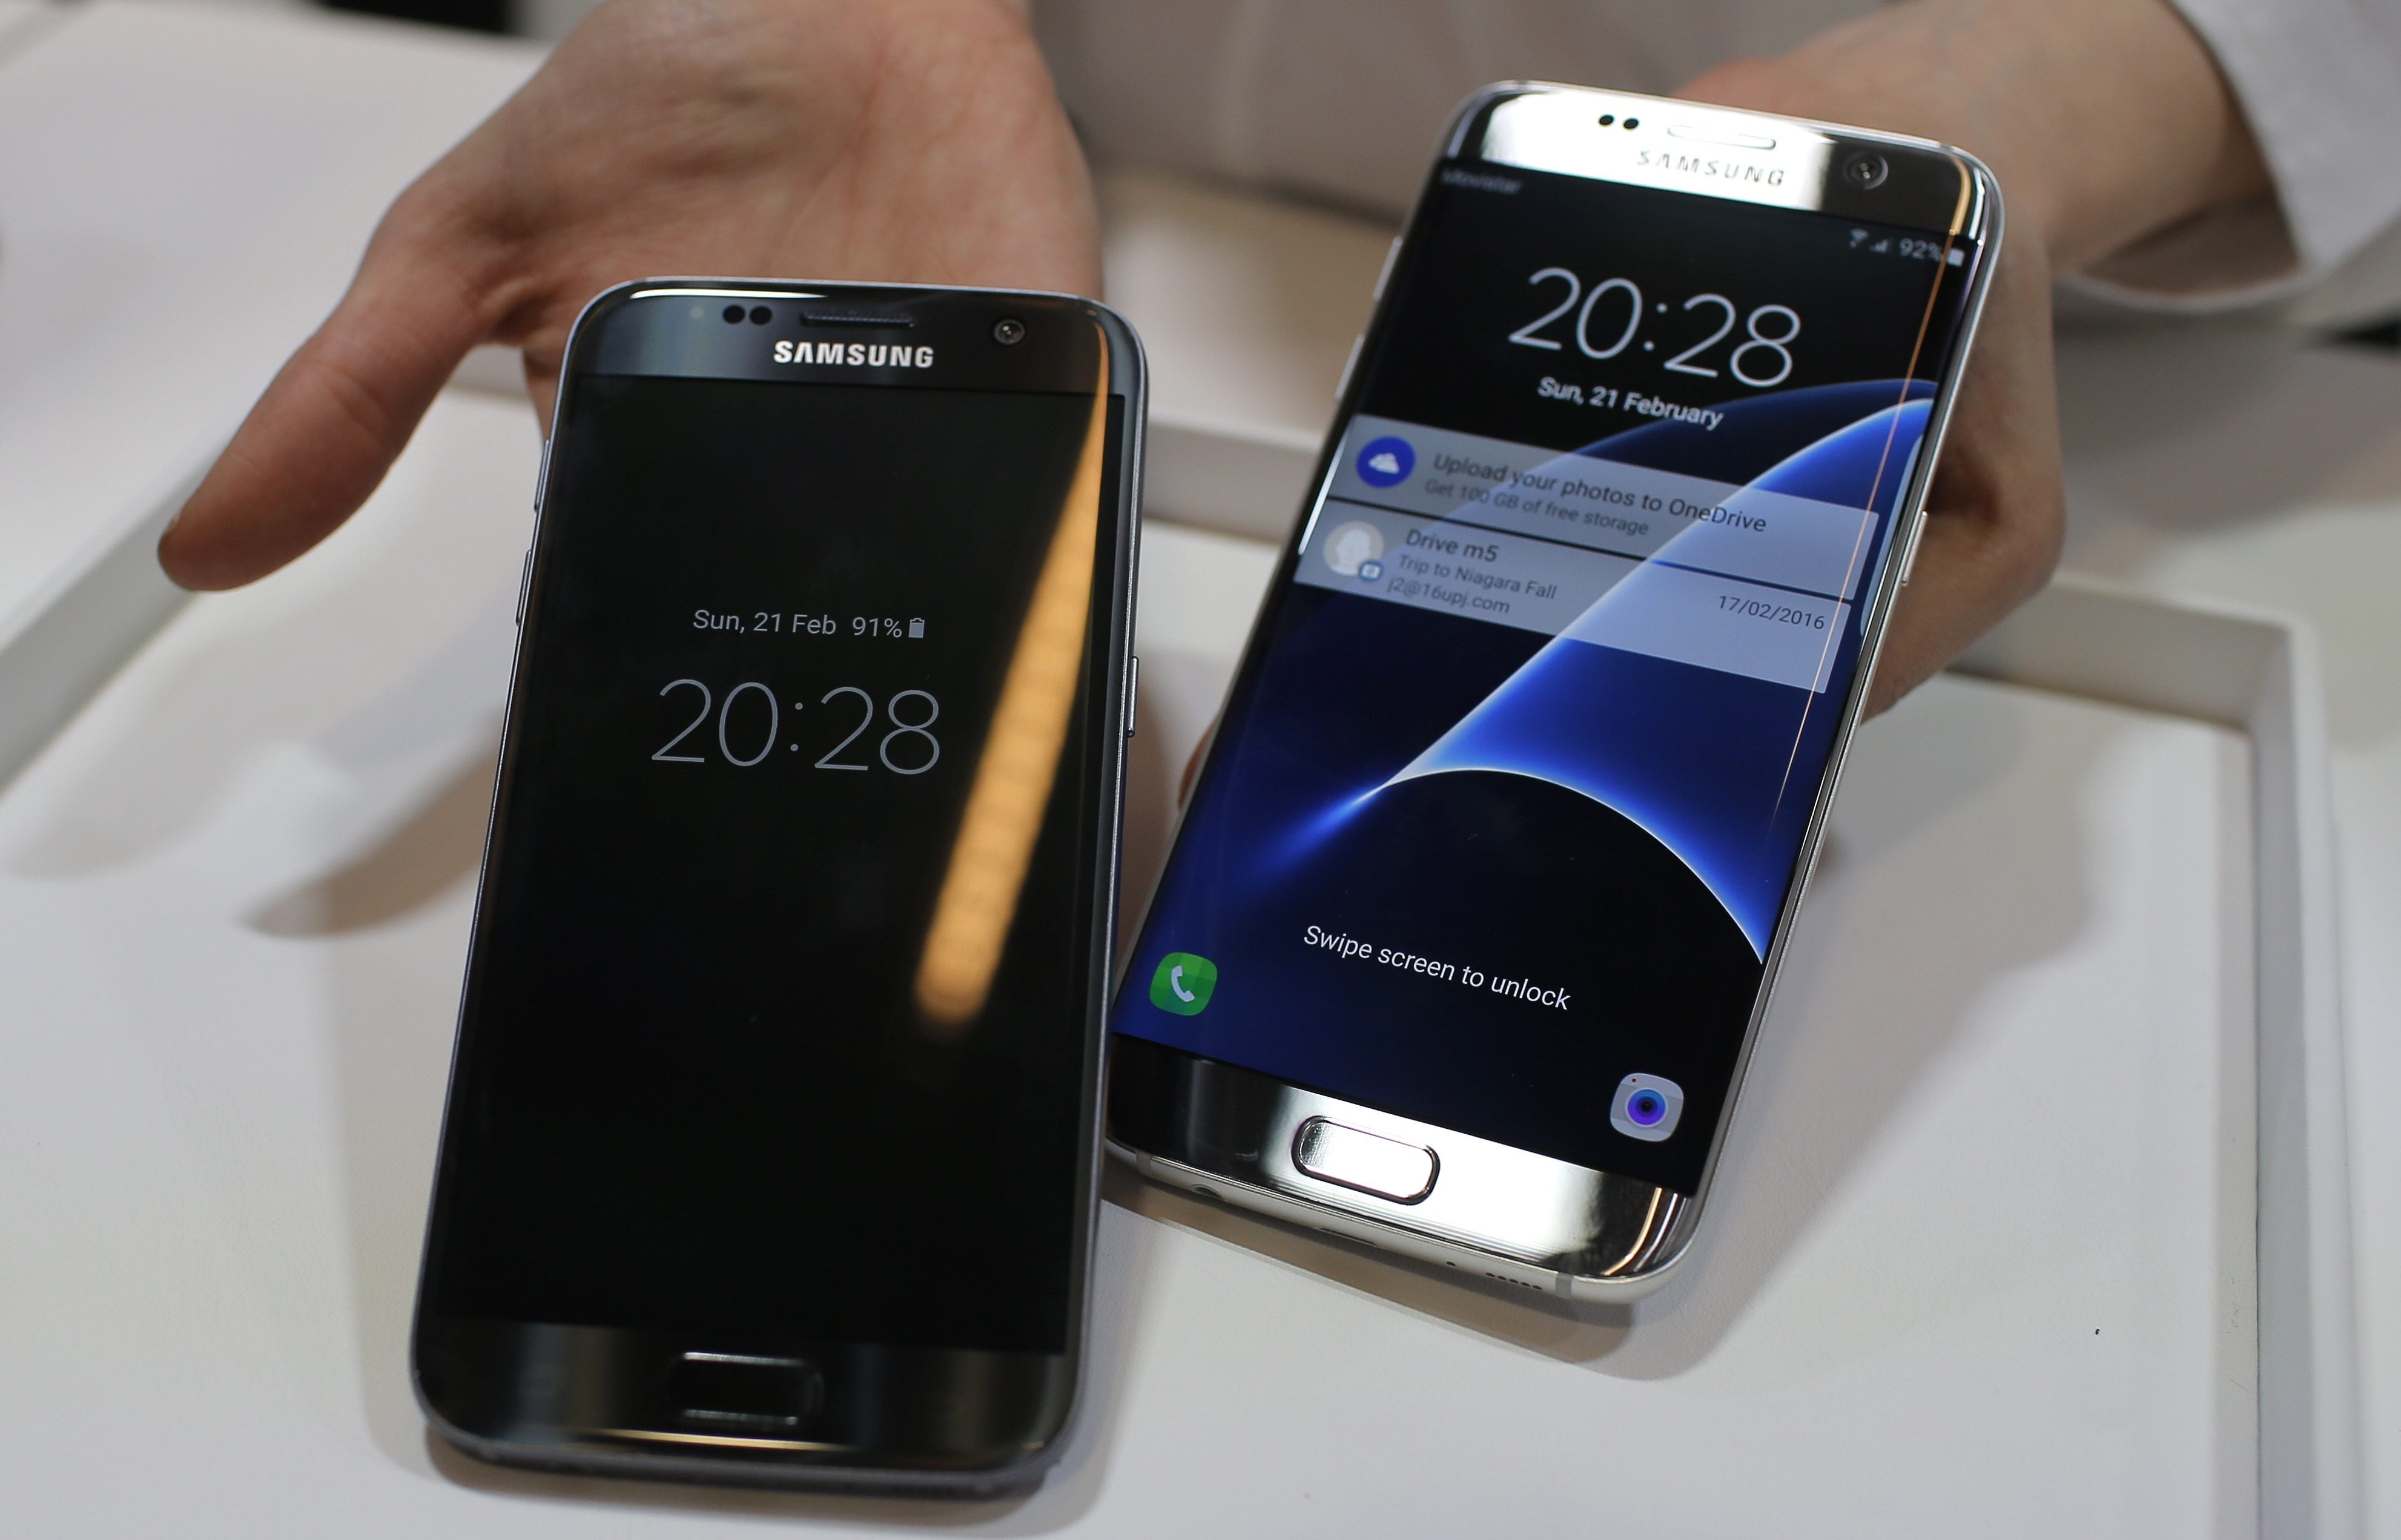 A Samsung Galaxy S7, left, and S7 Edge are displayed during the Samsung Galaxy Unpacked 2016 event on the eve of the Mobile World Congress wireless show last month in Barcelona, Spain. Samsung&#039;s phone cameras have shown tremendous improvements in just a few years. The new Galaxy S7 and S7 Edge phones take better pictures than last year&#039;s S6 models. They are neck and neck with Apple&#039;s iPhones, such that you no longer have to compromise on picture quality if you prefer Android.